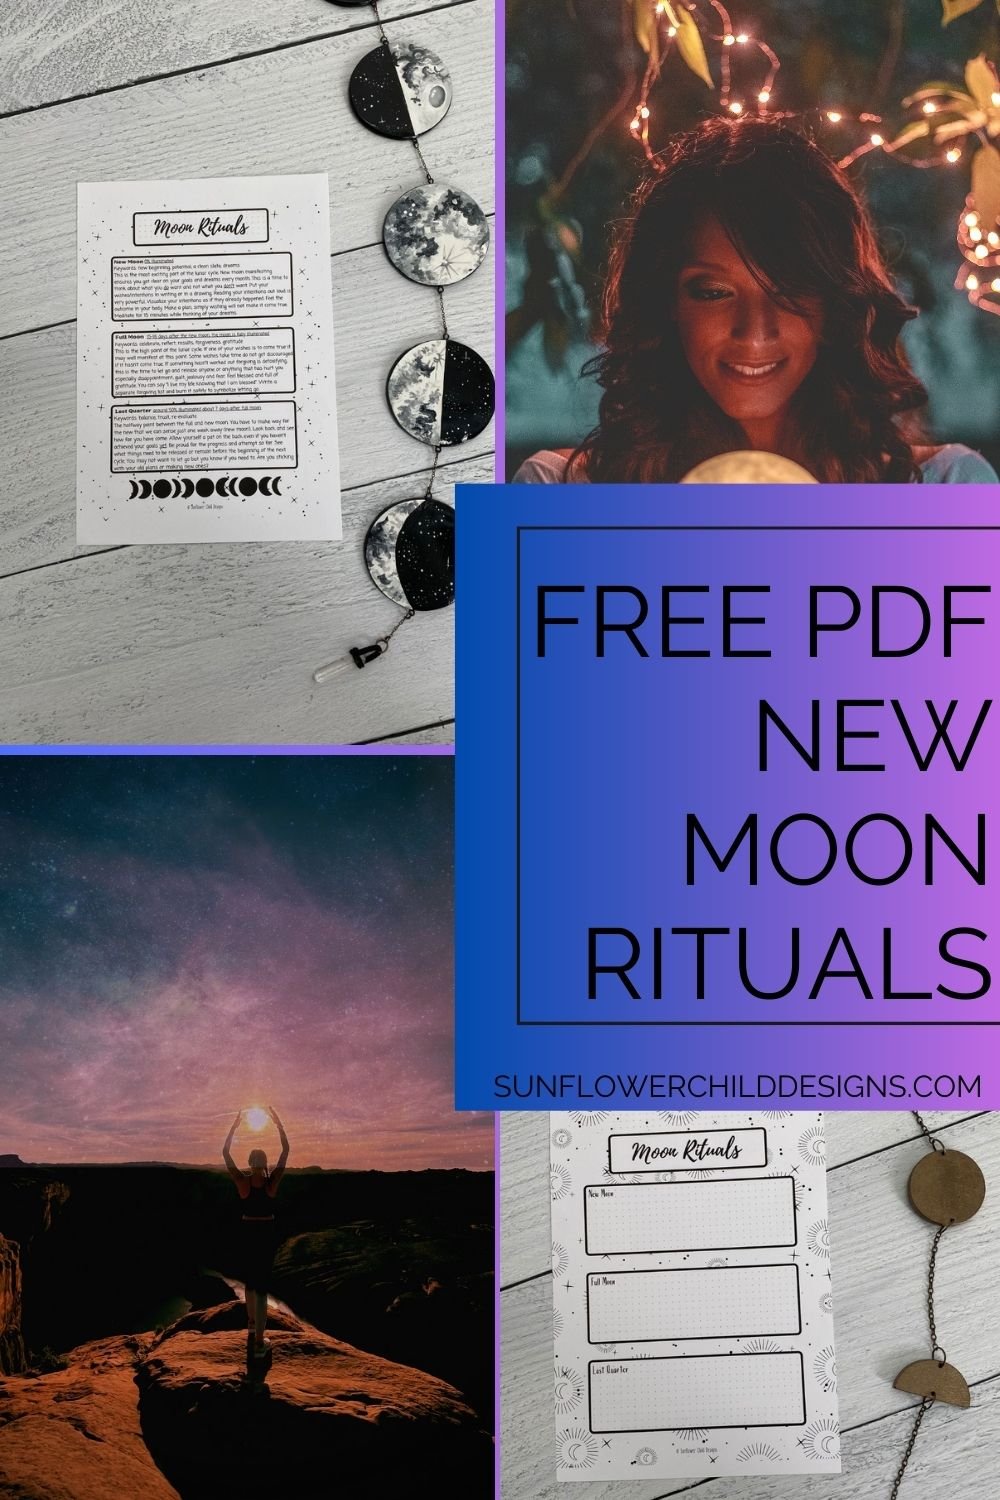 New and Full Moon Rituals — The Lunar Cycle Peak